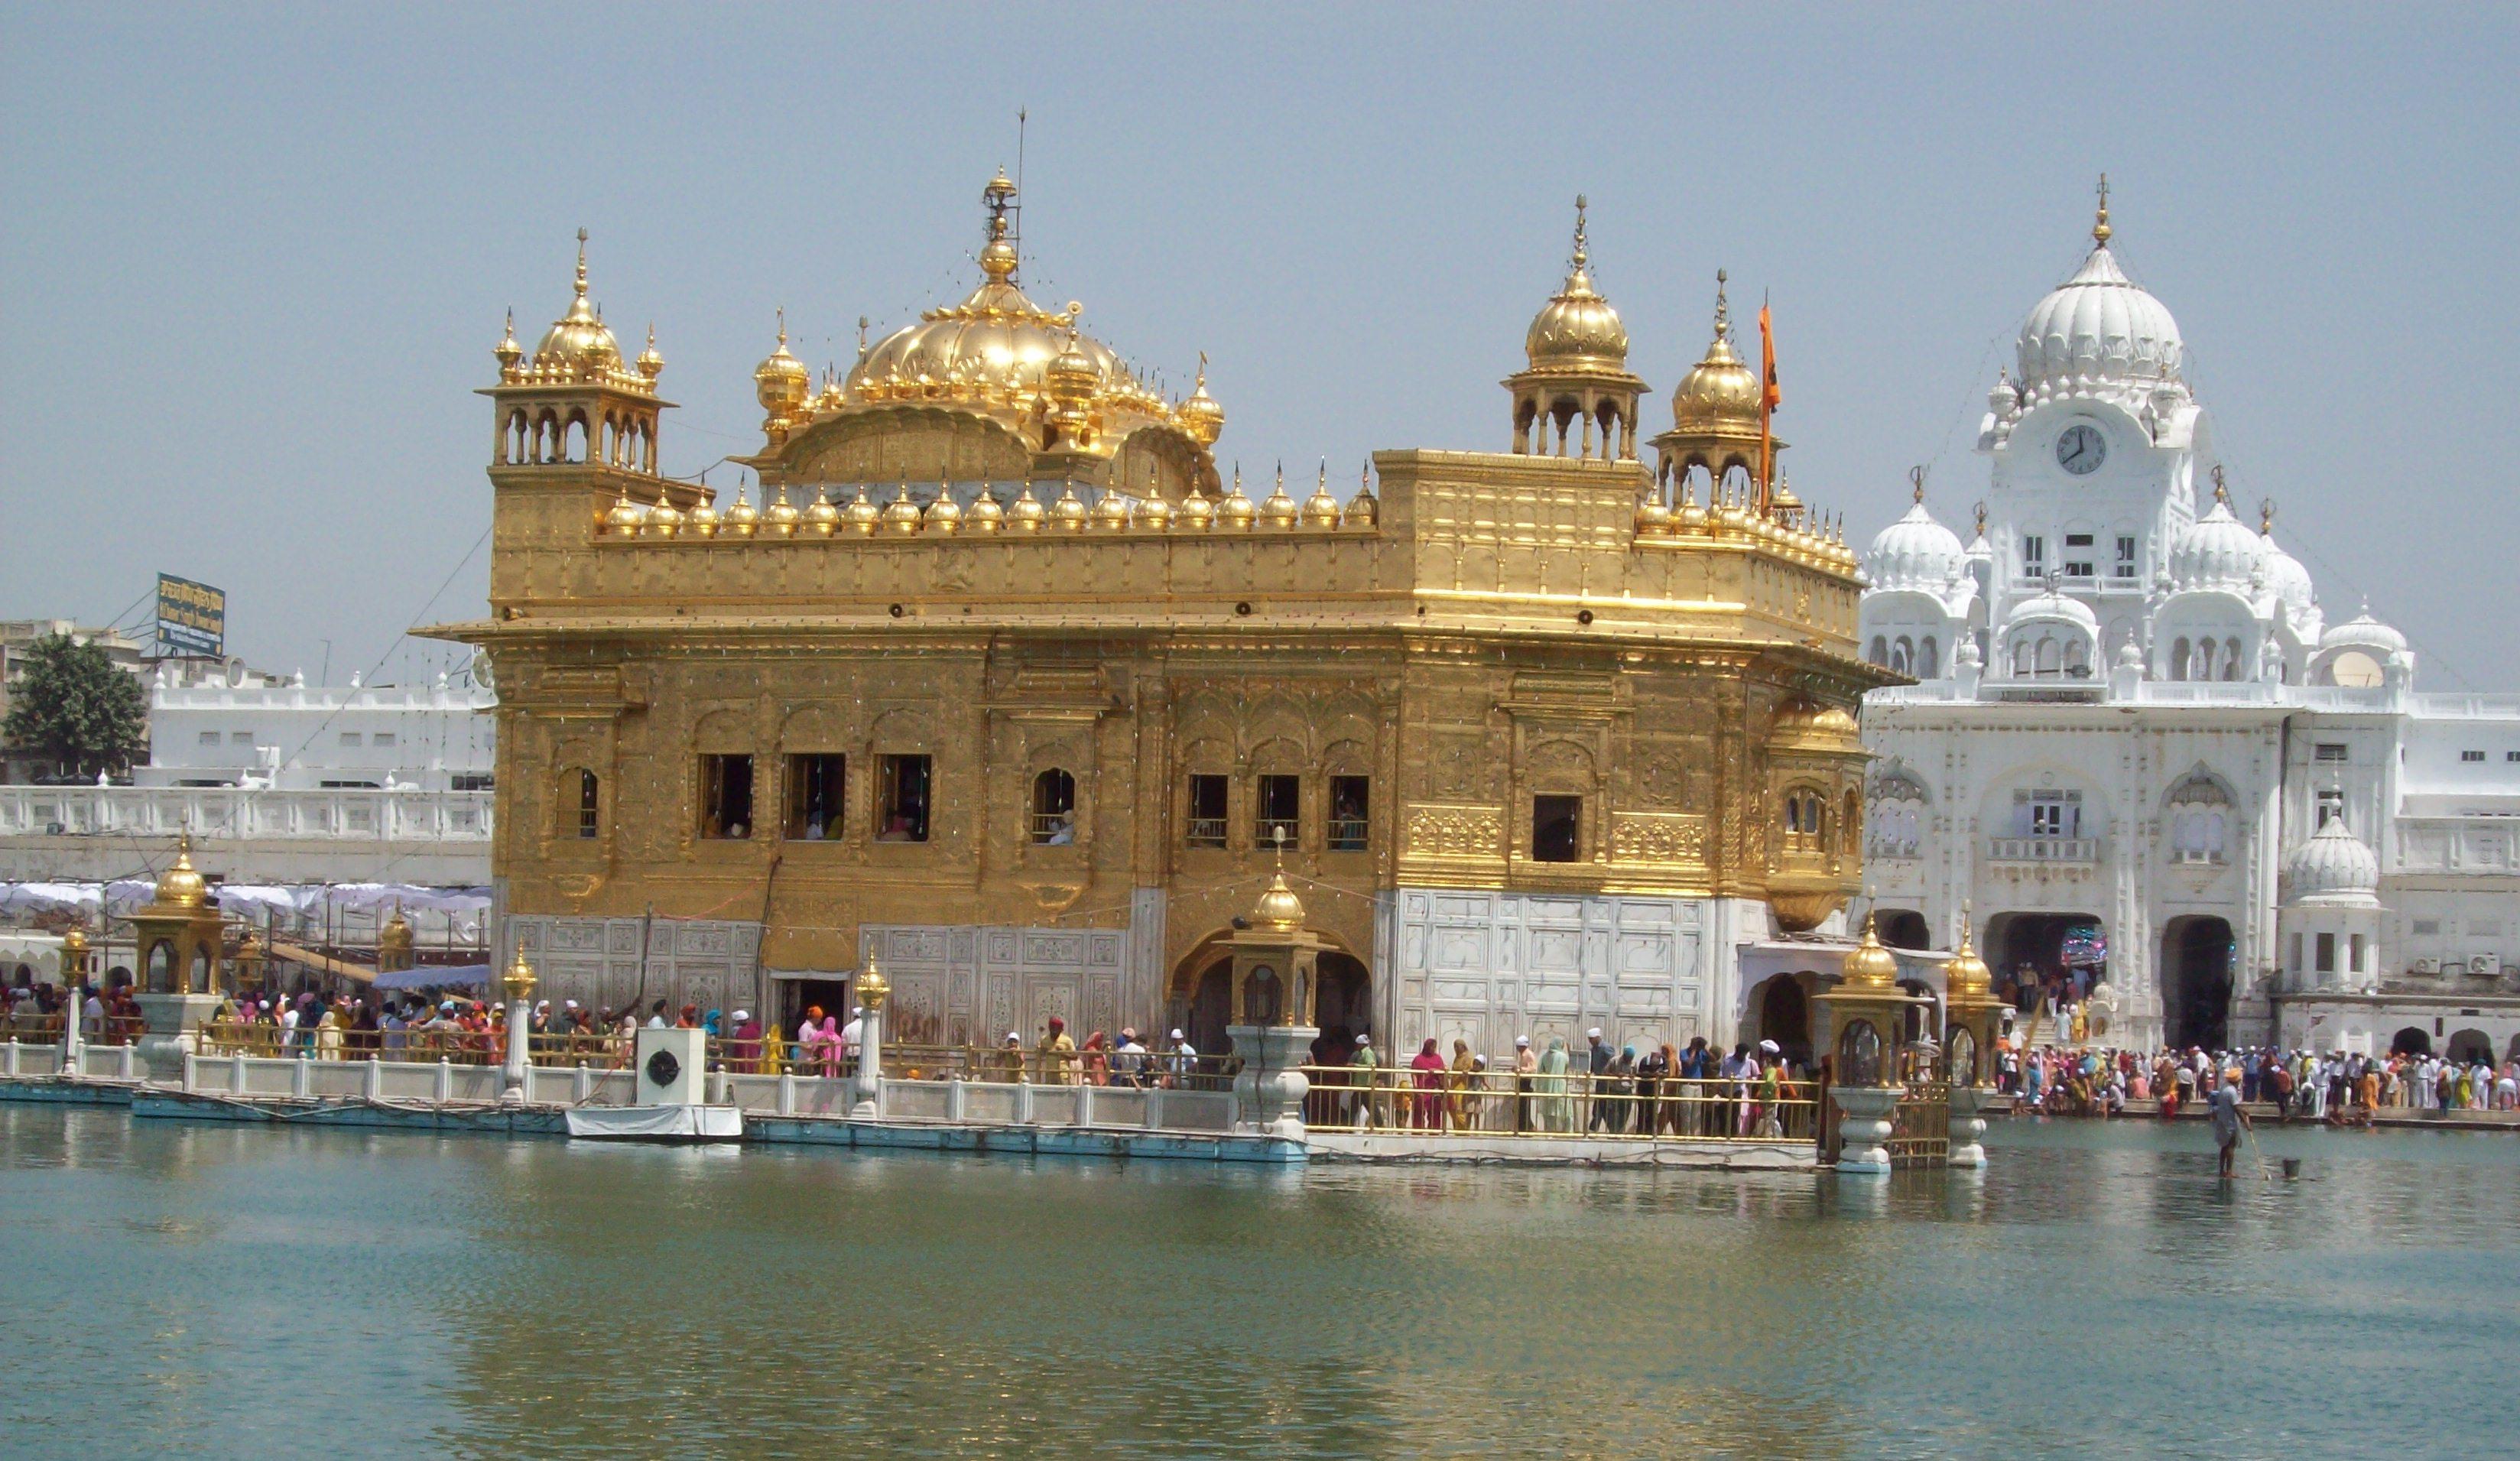 GOLDEN TEMPLE Photo, Image and Wallpaper, HD Image